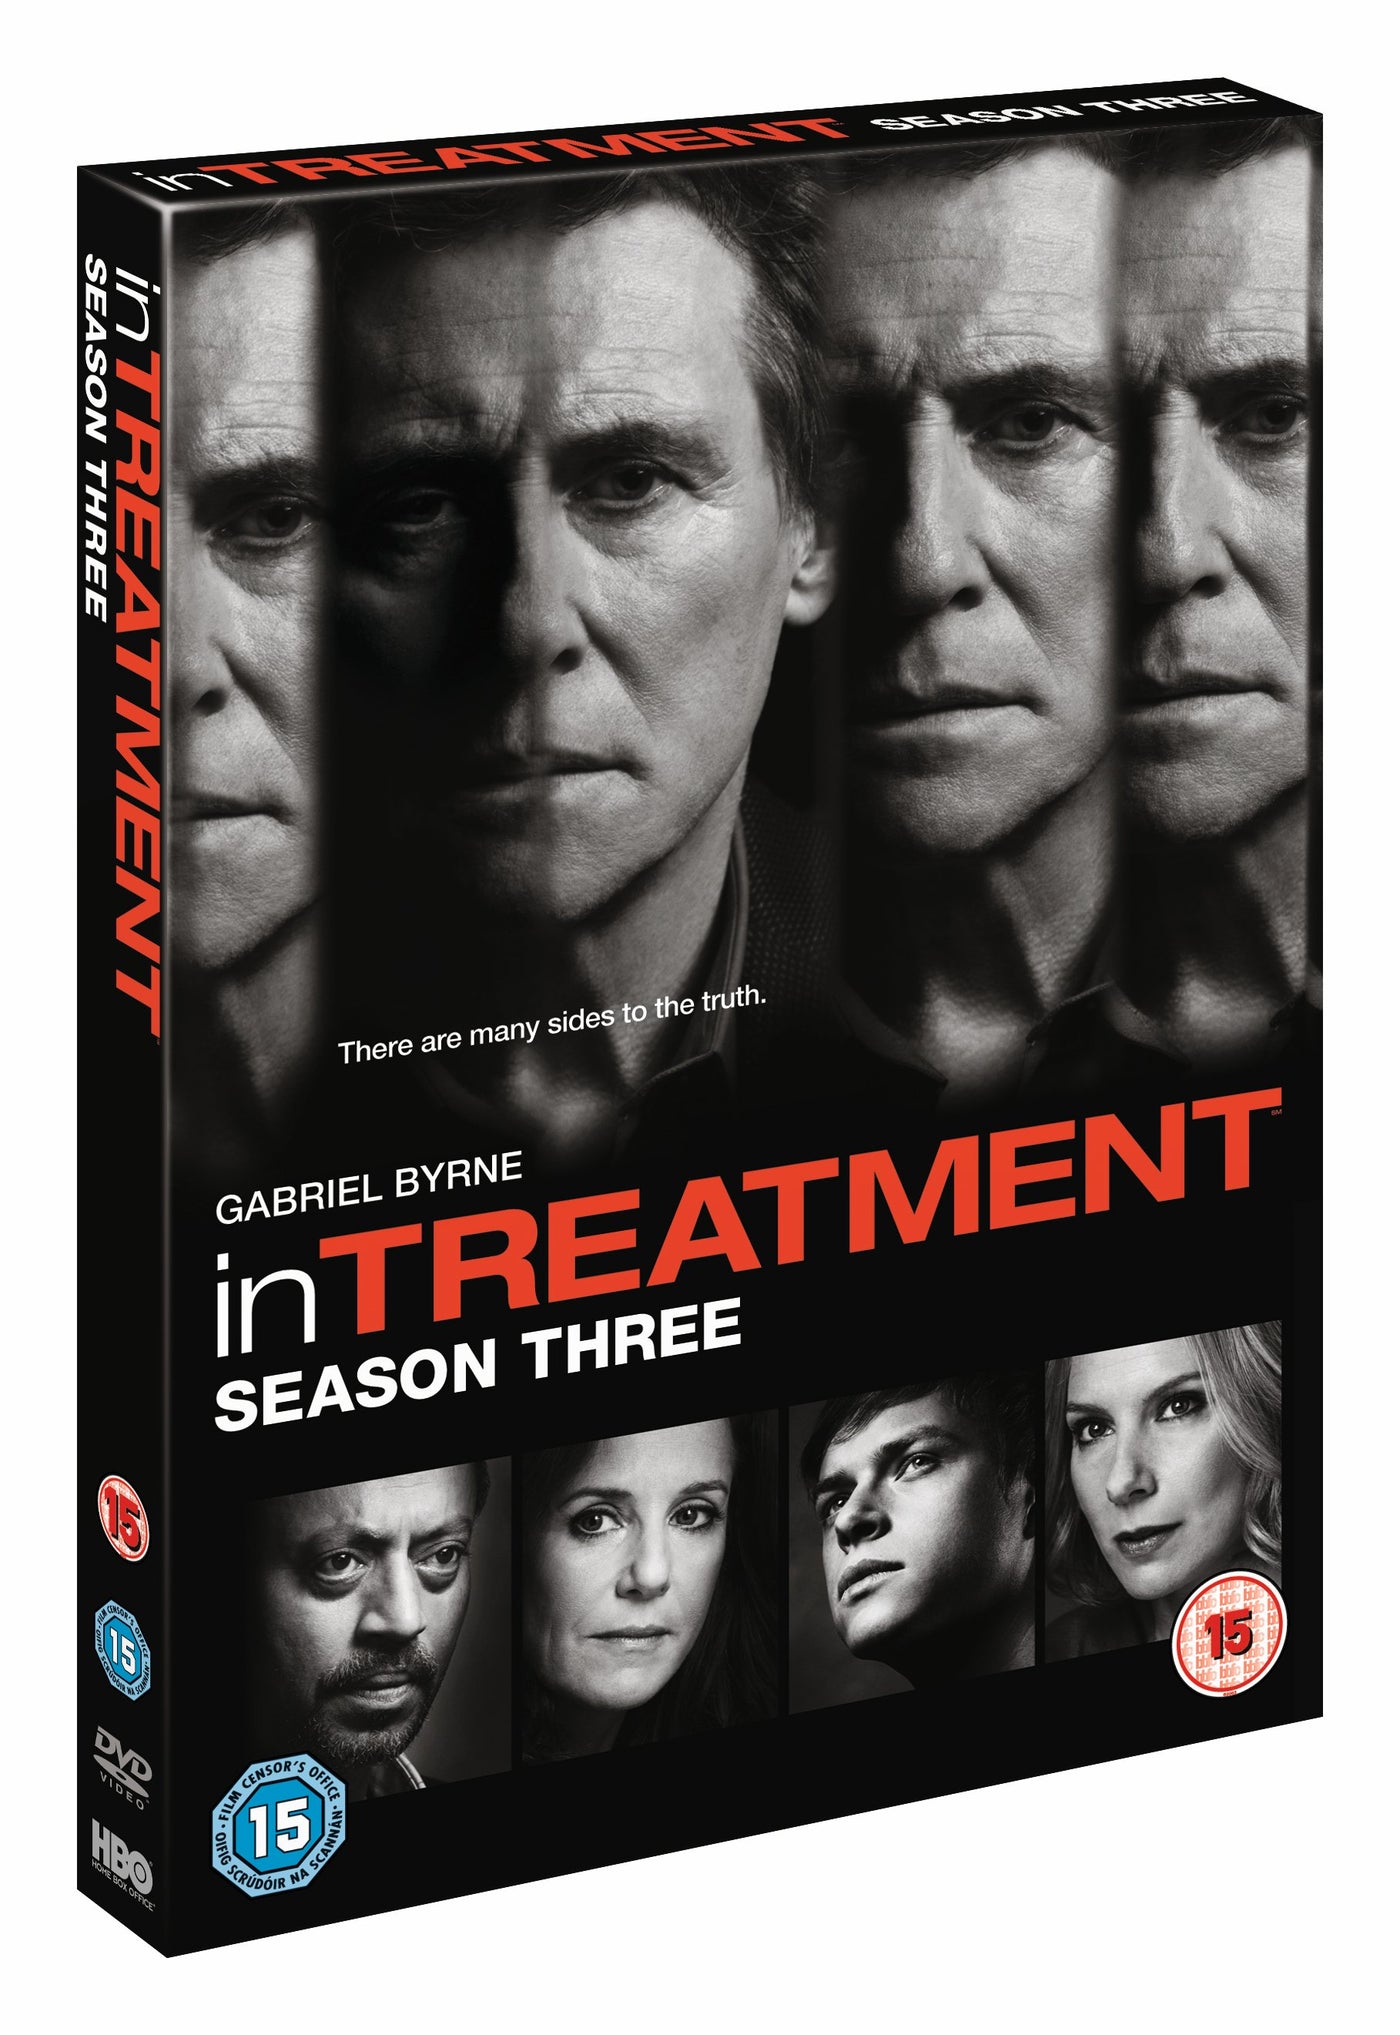 In Treatment - Complete HBO Season 3 [2012] (DVD)